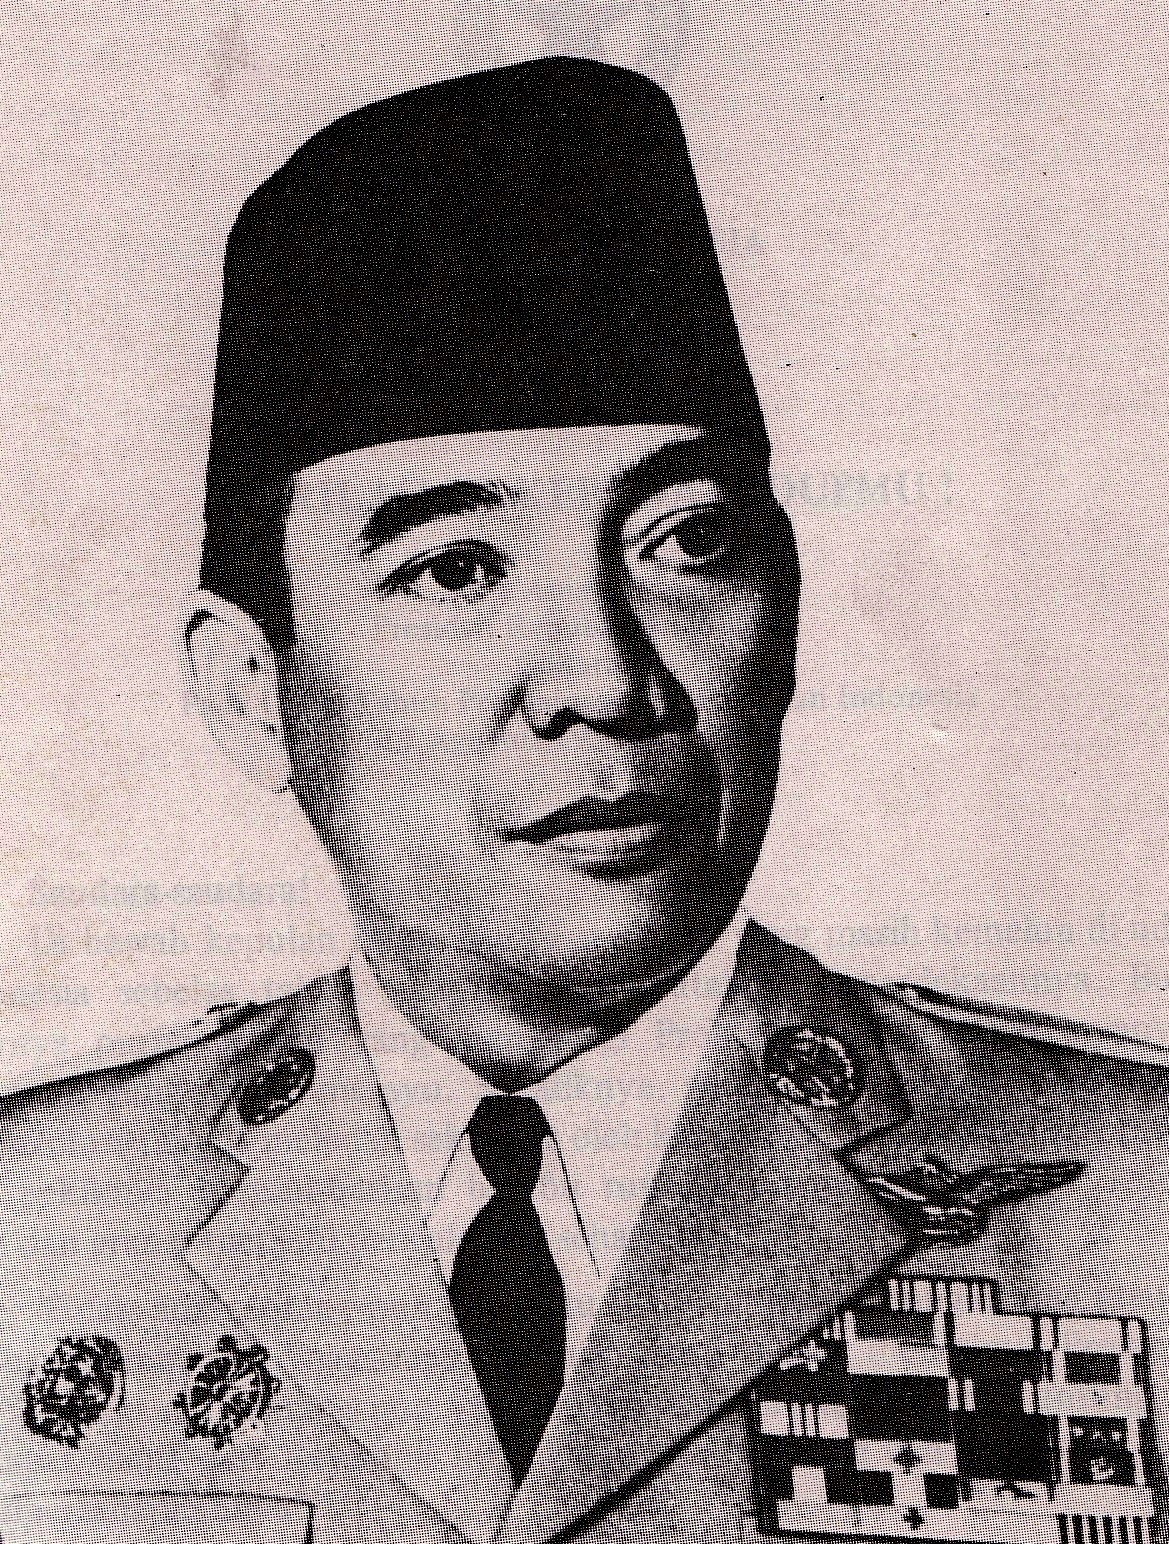 Ir. Soekarno Biography - The First President Of Republic Indonesia